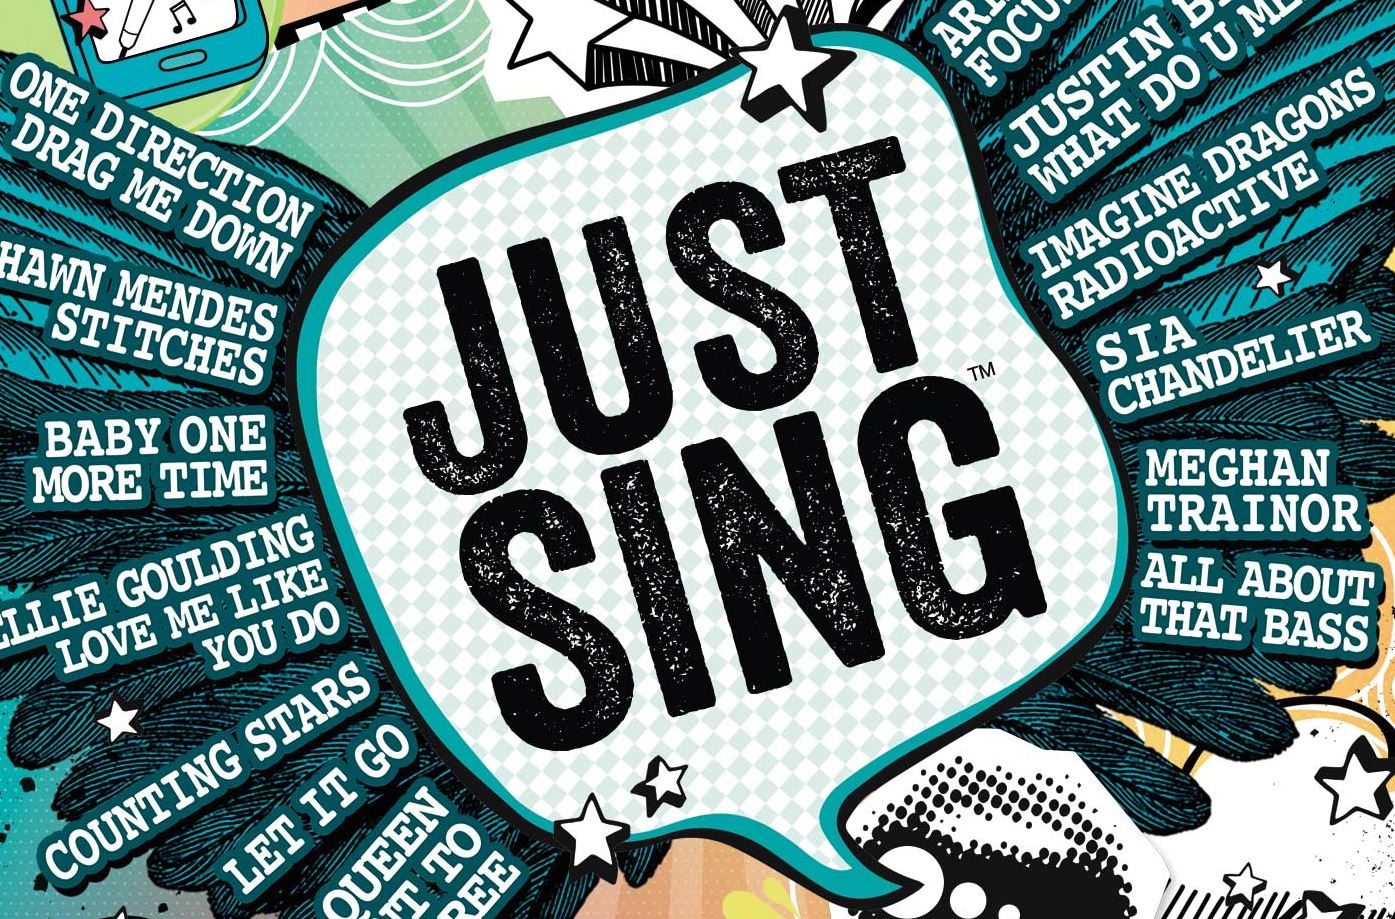 Ubisoft’s Just Sing for Xbox One will let you sing or lip sync more than 40 songs